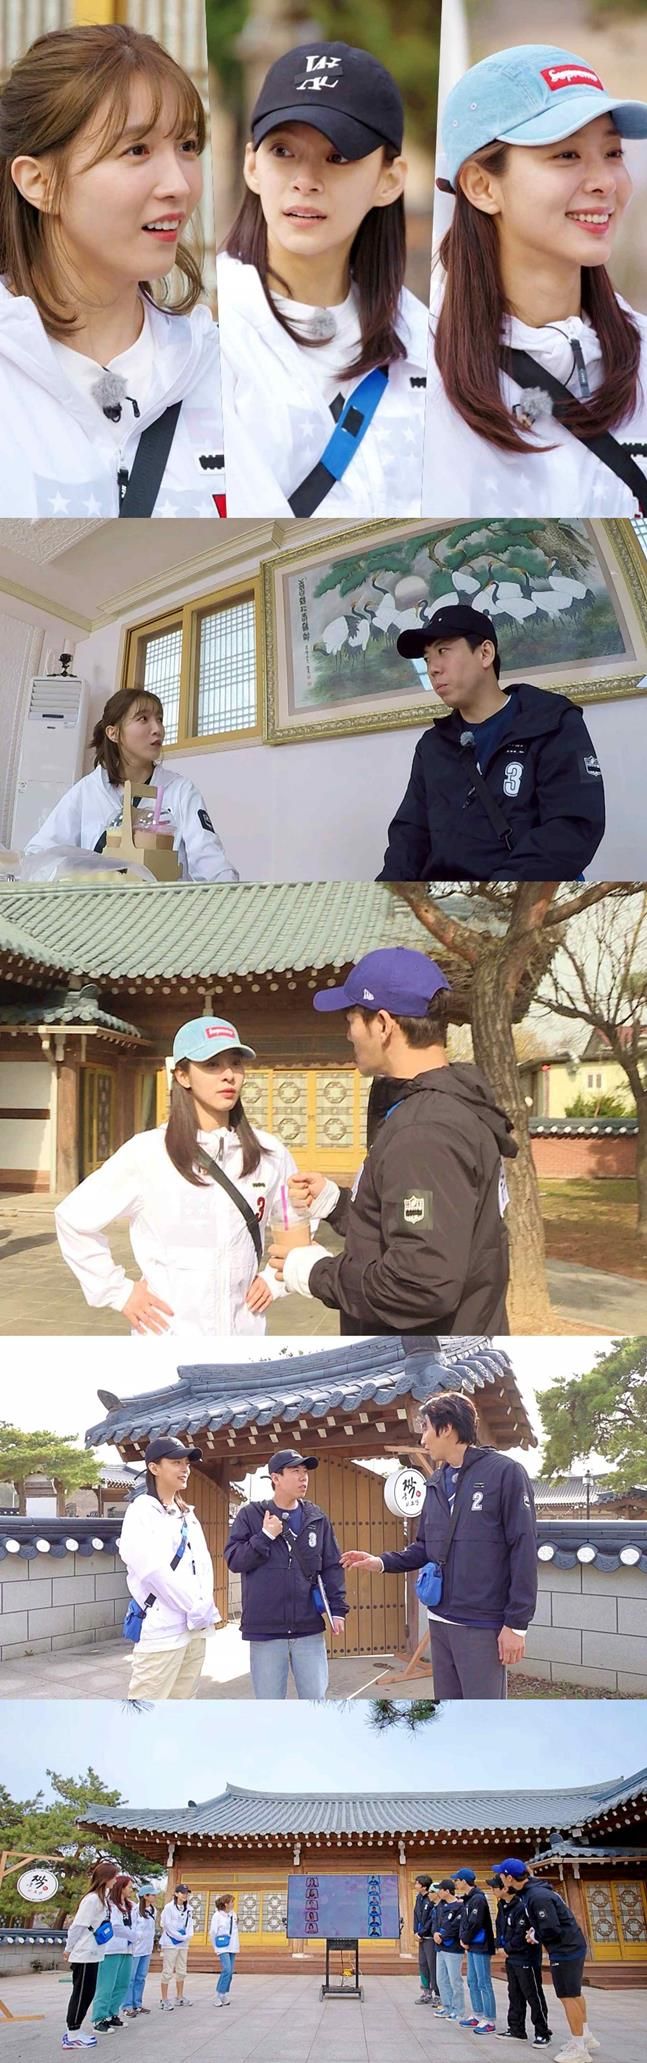 SBS Running Man, which will be broadcast on the 25th, will be featured as a guest by Lee Cho-hee, Jin He-In and Seol In-ah after last week.The first edition of the previously broadcast Signal Entertainment Village is a male and female member concept that entered the entertainment village to find the best entertainment partner. It has provided new fun by revealing each others inner hearts without hesitation through freshness as well as inner heart interviews.Jeong He-In, who won first place in the first impression vote last week, made an issue on various portal sites with Hwang Shin-hye resemblance and beautiful member than Running Man members, and Lee Cho-hee was reborn as a NEW hunk with a white chimney as much as Yang Se-chan in the quiz mission.He also boasted a burning desire to win and became a national evil bar in the National Sadon, which will continue to be played by actresses this week.Lee Cho-hee, who is about to make the final result, said, I am one-sided, and he was working on a sunflower operation, and he was saddened by the members charm.Jin He-In also captivated the hearts of male members with the charm of Maseong, and even Lee Kwang-soo appeals to his hobby, Jin He-In, I am raising horses.Meanwhile, Seol In-ah, who boasted of fantasies with Kim Jong-kook as a common concern of movement, was reborn as a key figure in the final choice with an unexpected strategy.